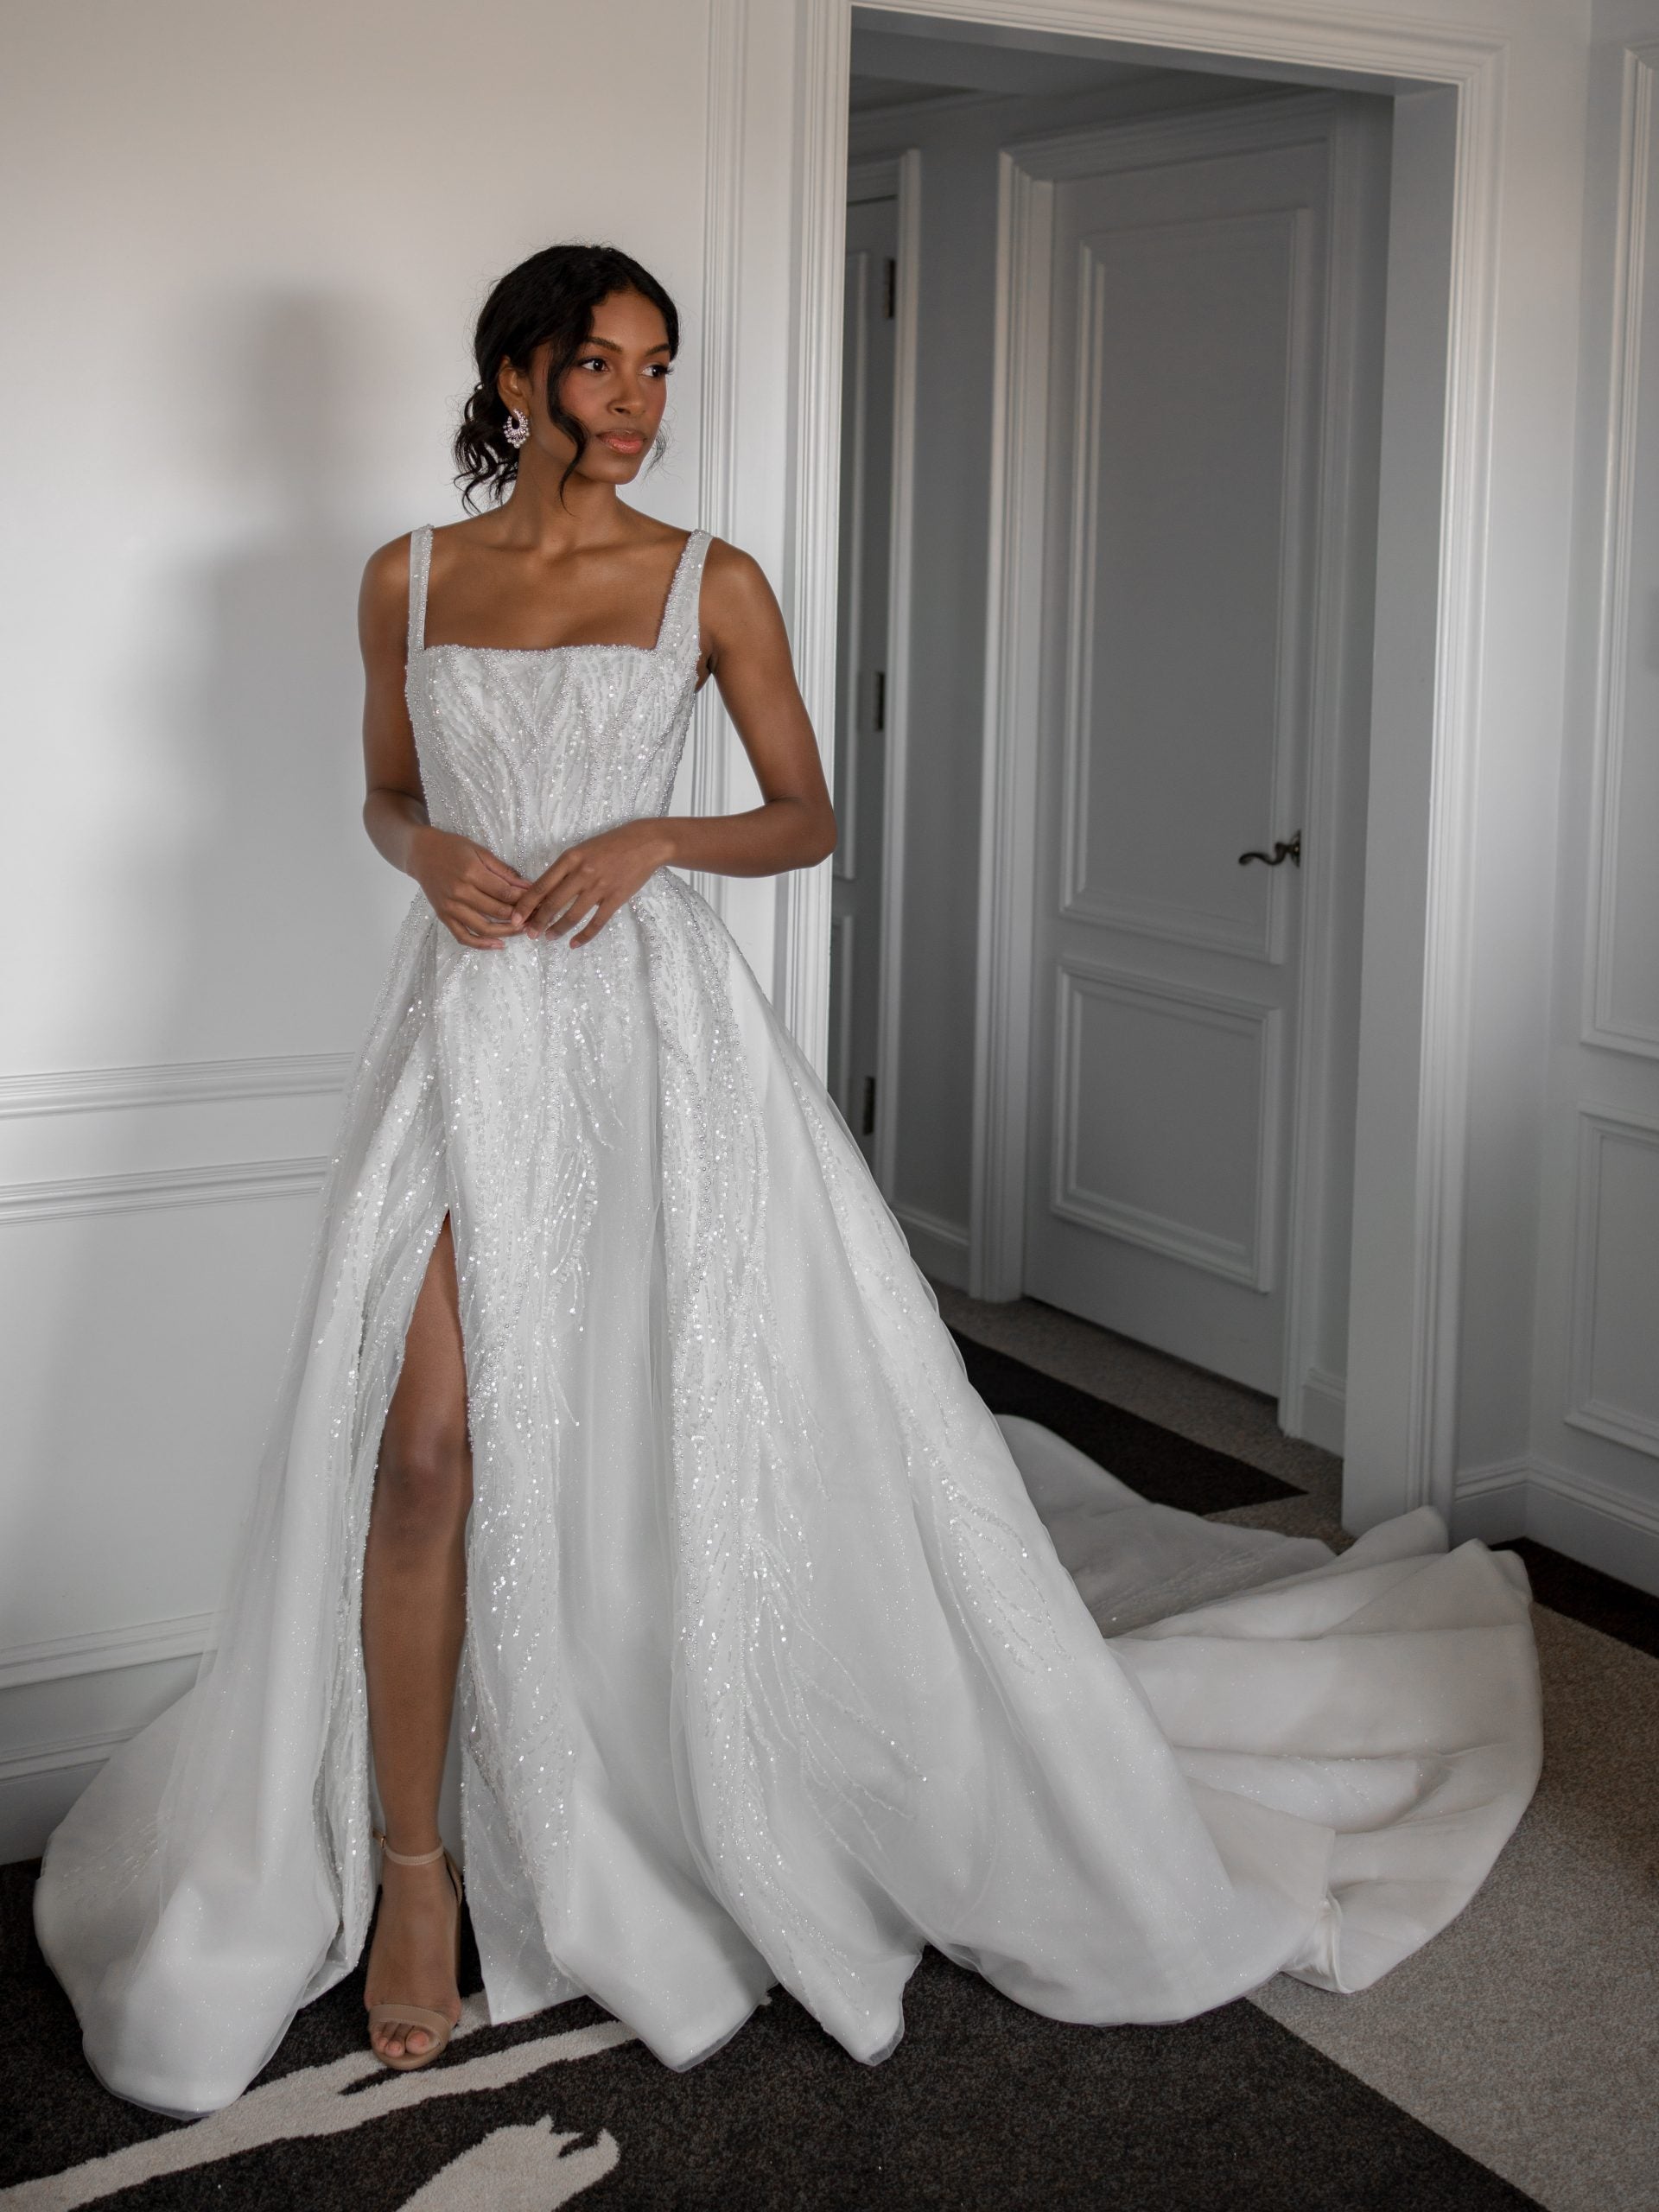 Chic And Dramatic Square-Neck Beaded Ball Gown by Blanche Bridal - Image 1